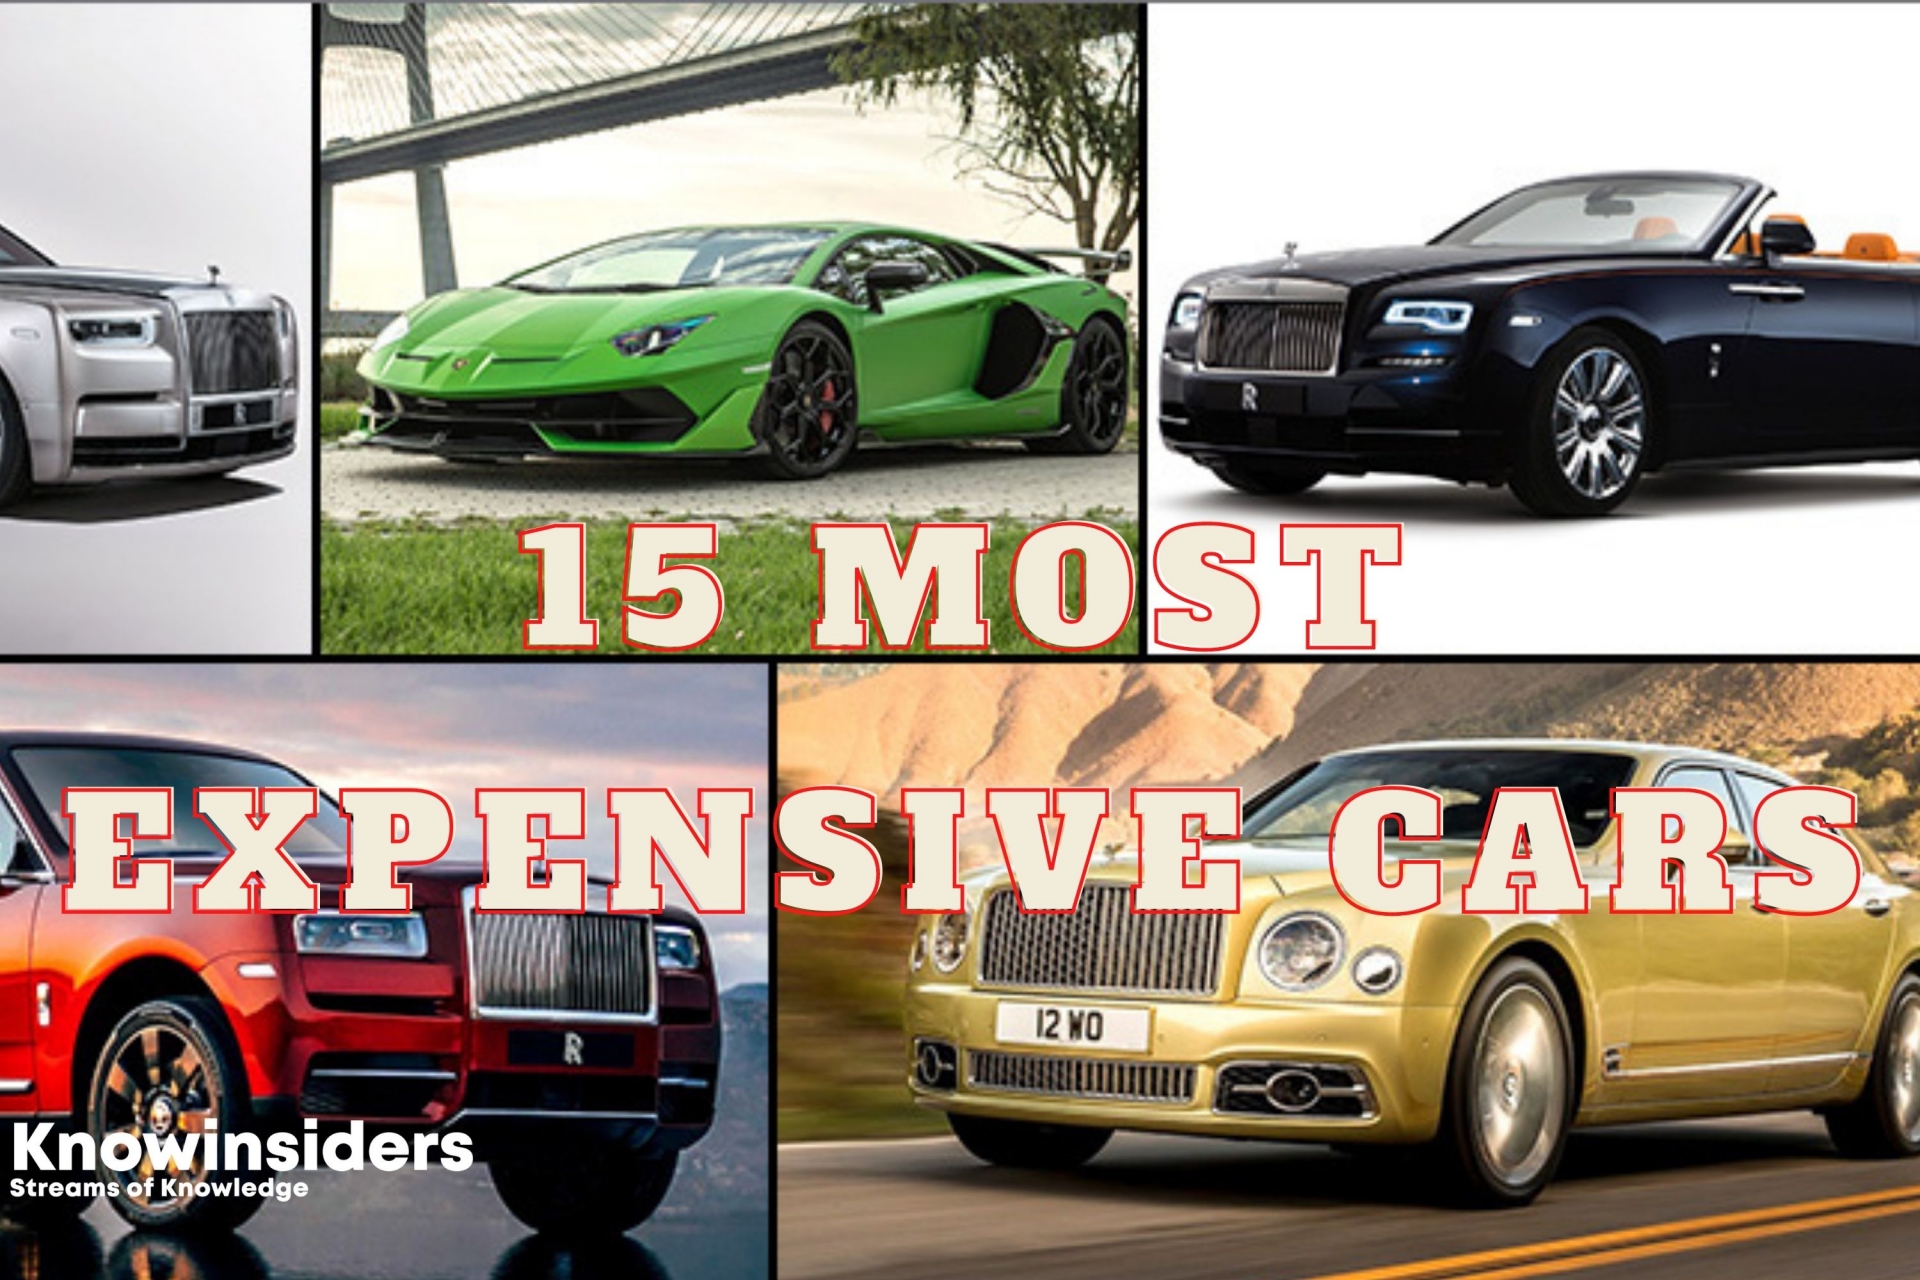 Top 15 Most Expensive Cars In The World 2021/2022